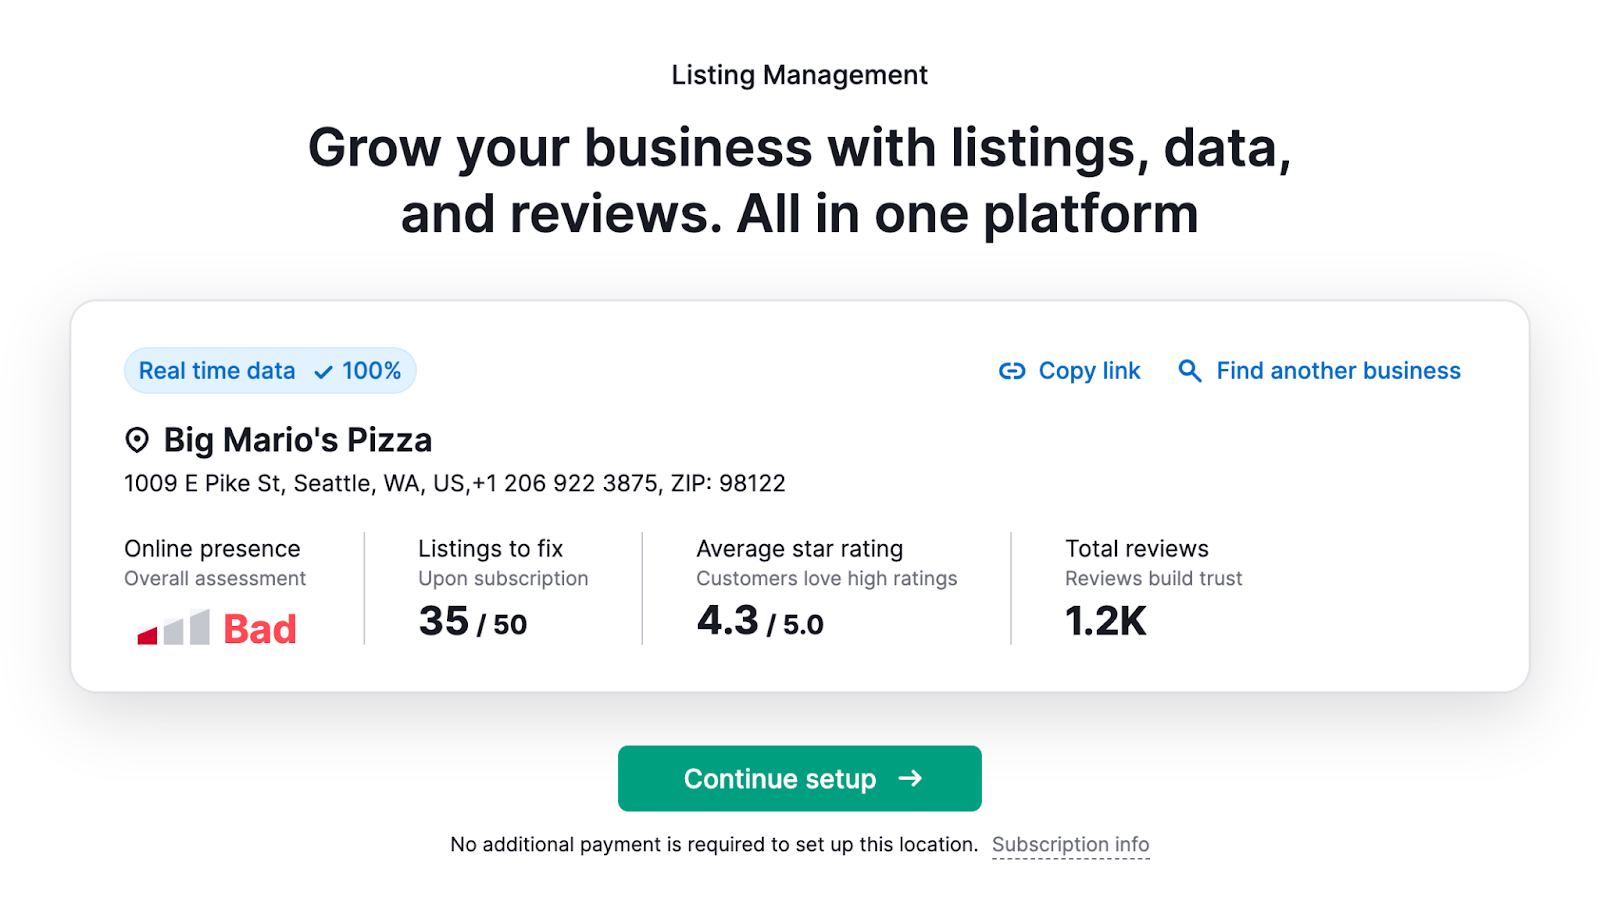 A dashboard showing online presence summary for "Big Mario's Pizza"